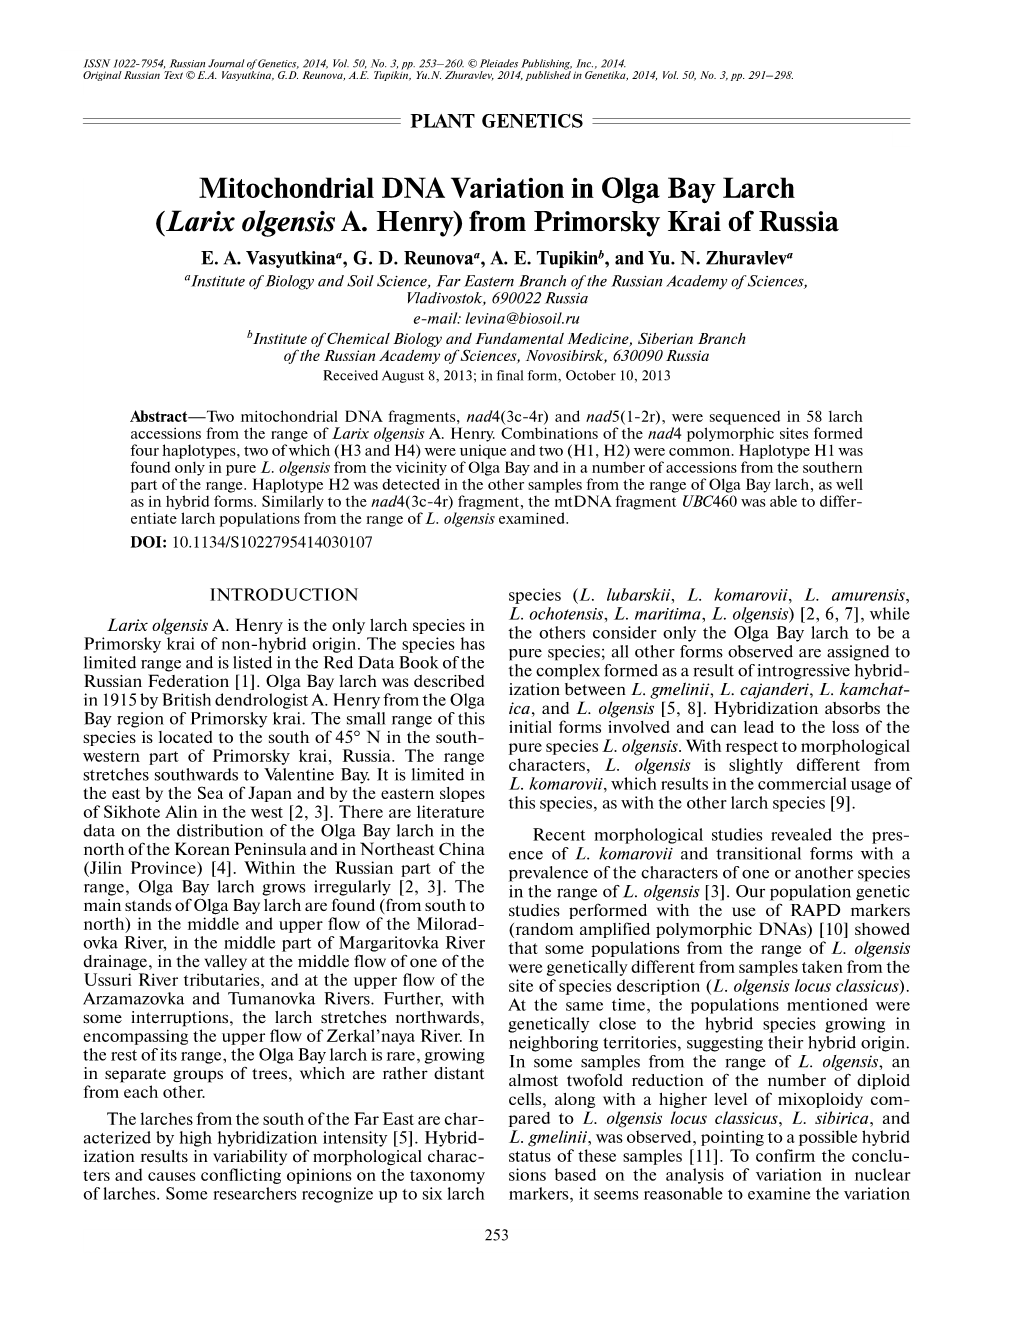 Mitochondrial DNA Variation in Olga Bay Larch (Larix Olgensis A. Henry) from Primorsky Krai of Russia E